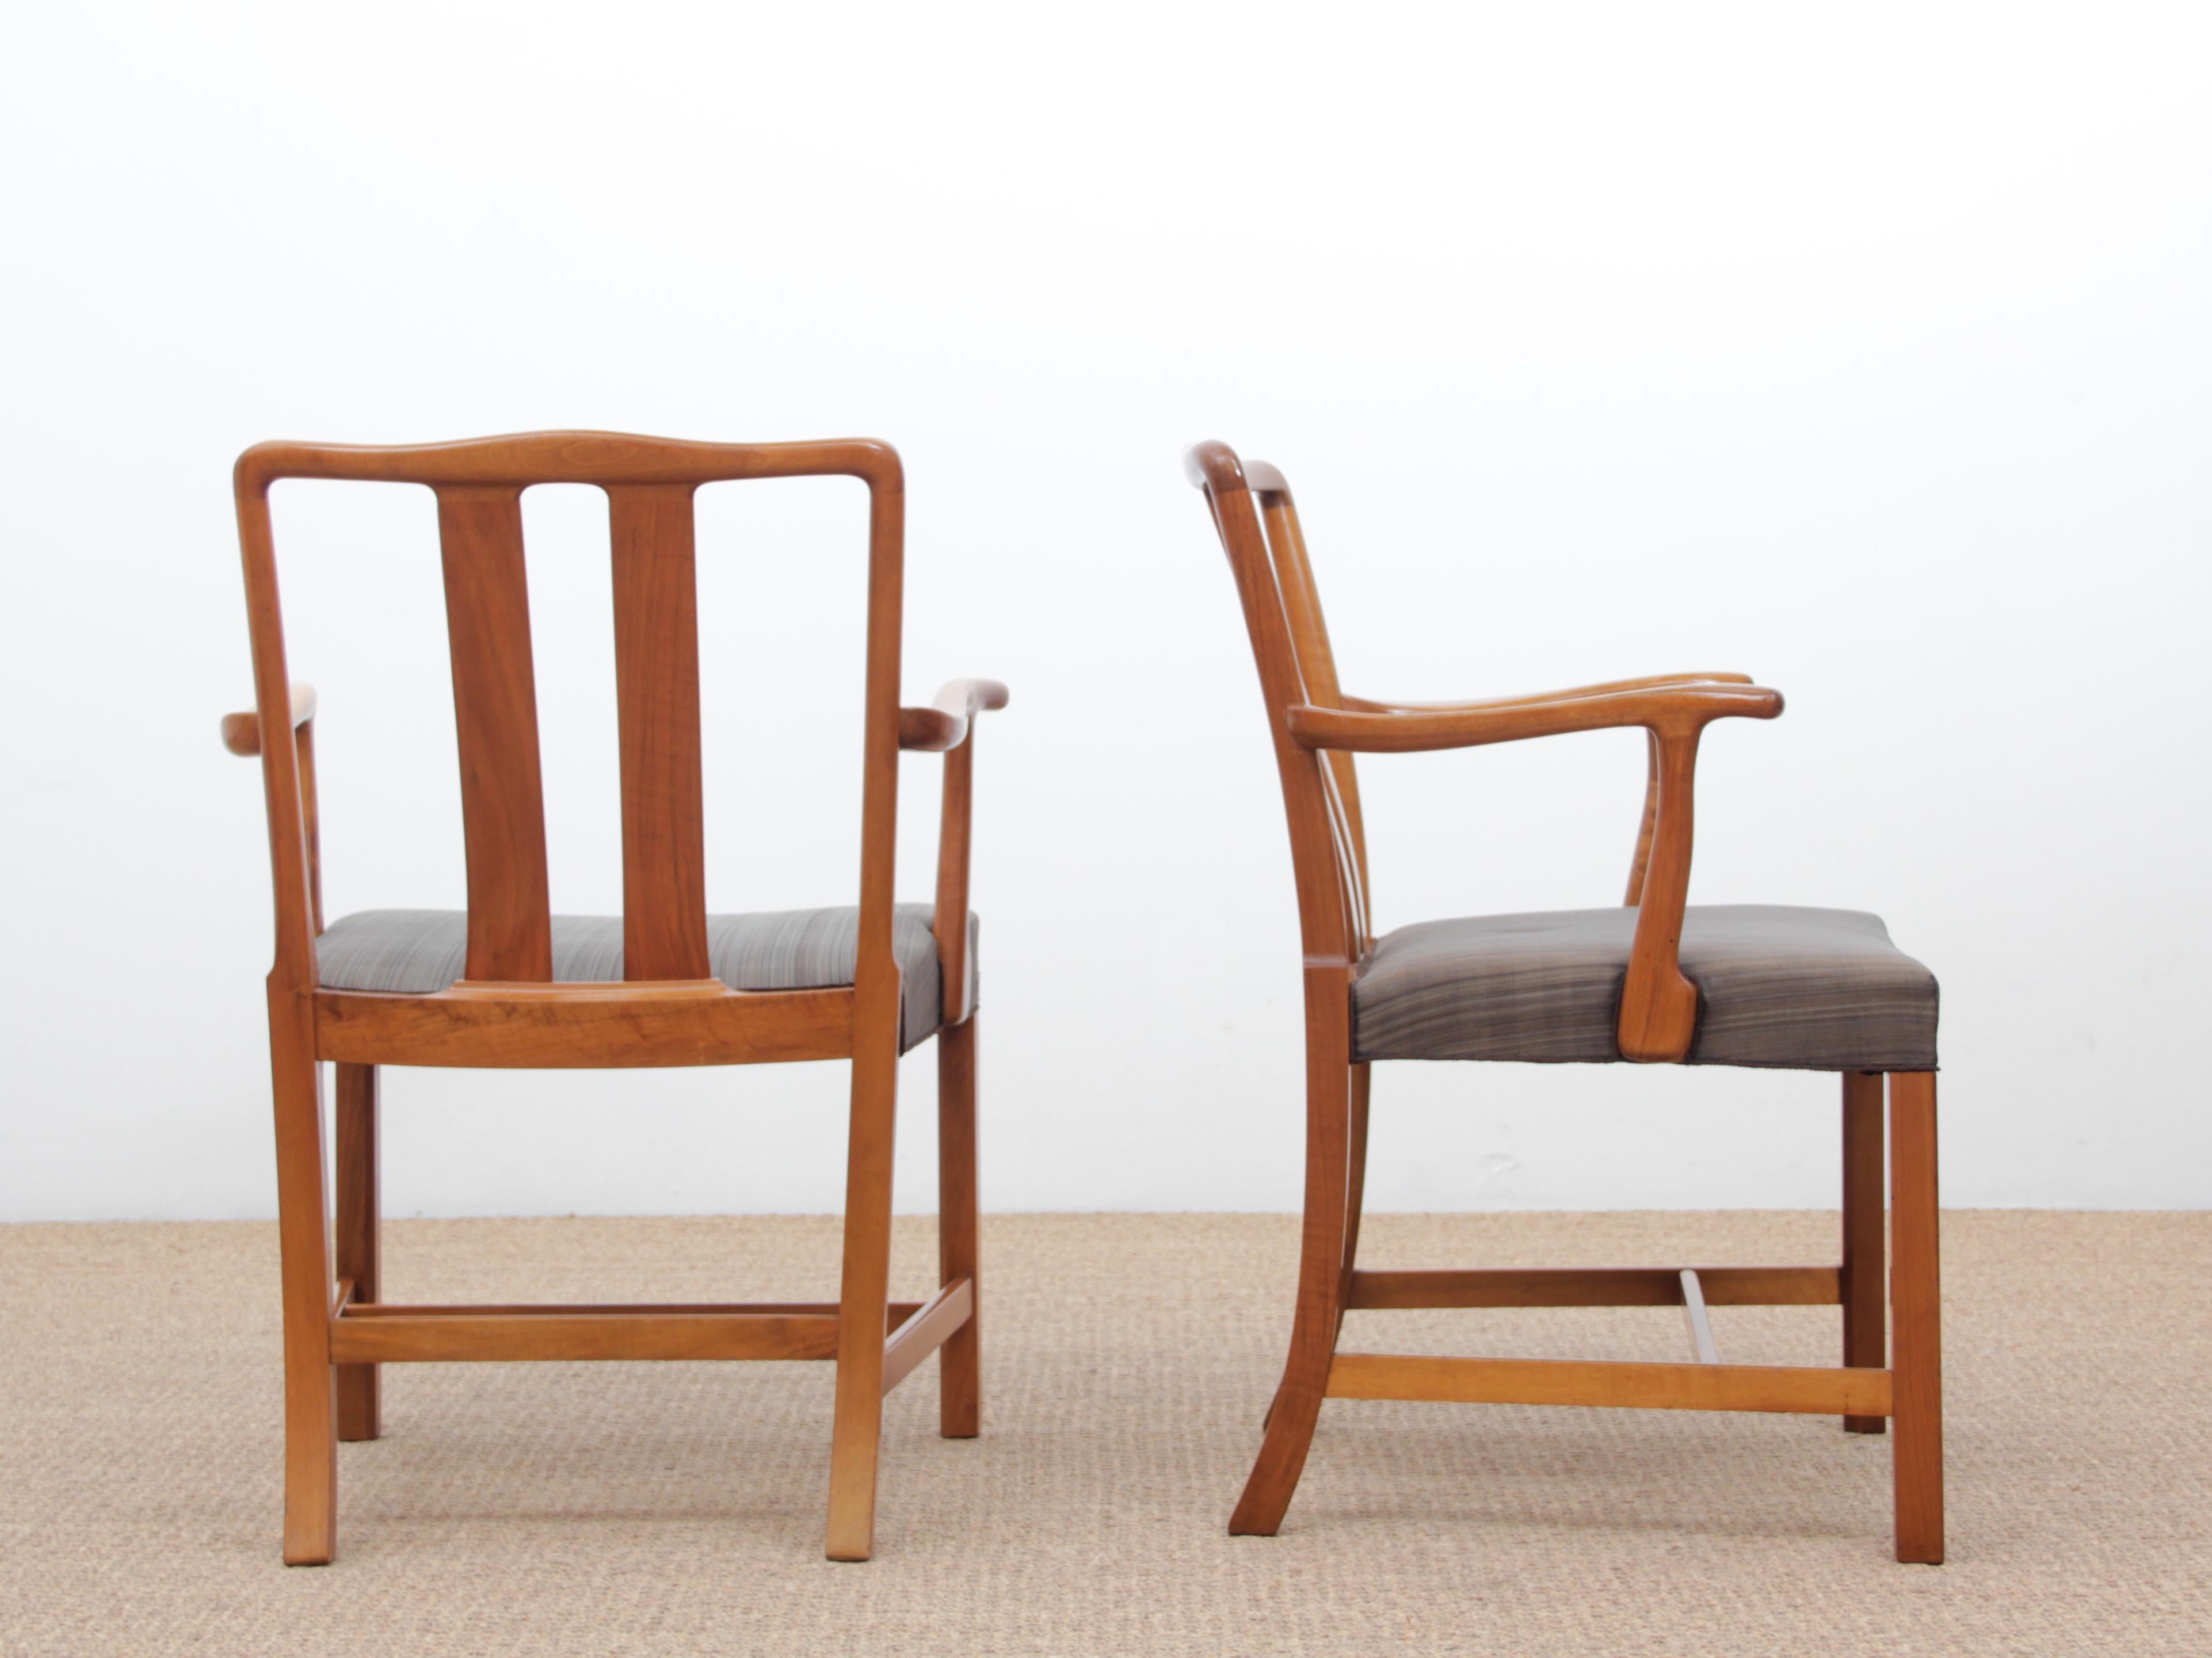 Mid-Century Modern Scandinavian Pair of Armchairs by Ole Wancher In Good Condition For Sale In Courbevoie, FR